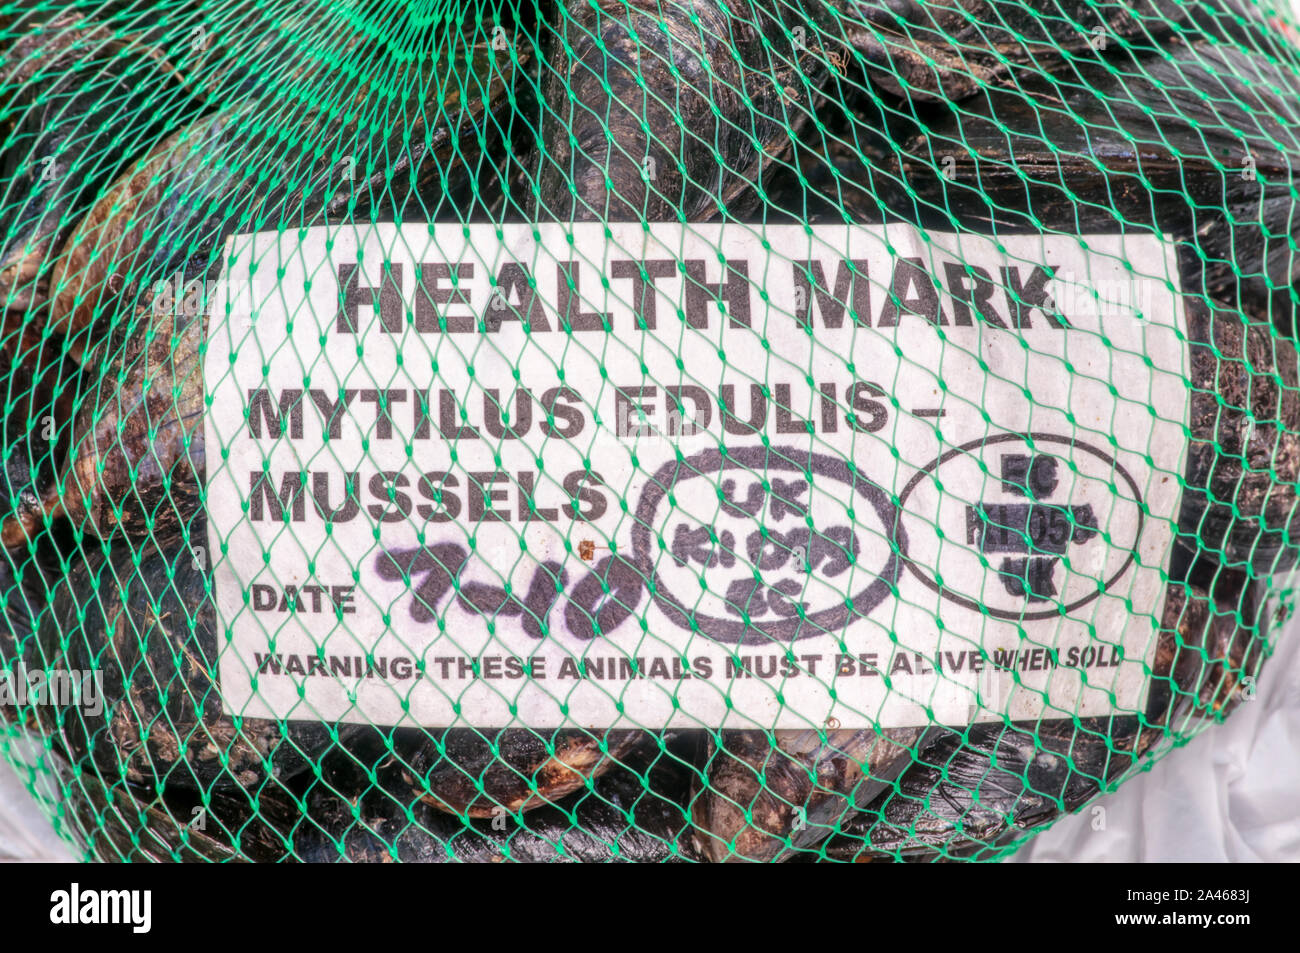 Sign on a bag of Brancaster mussels includes their Latin name, Mytilus edulis, & warns These animals must be alive when sold. Stock Photo